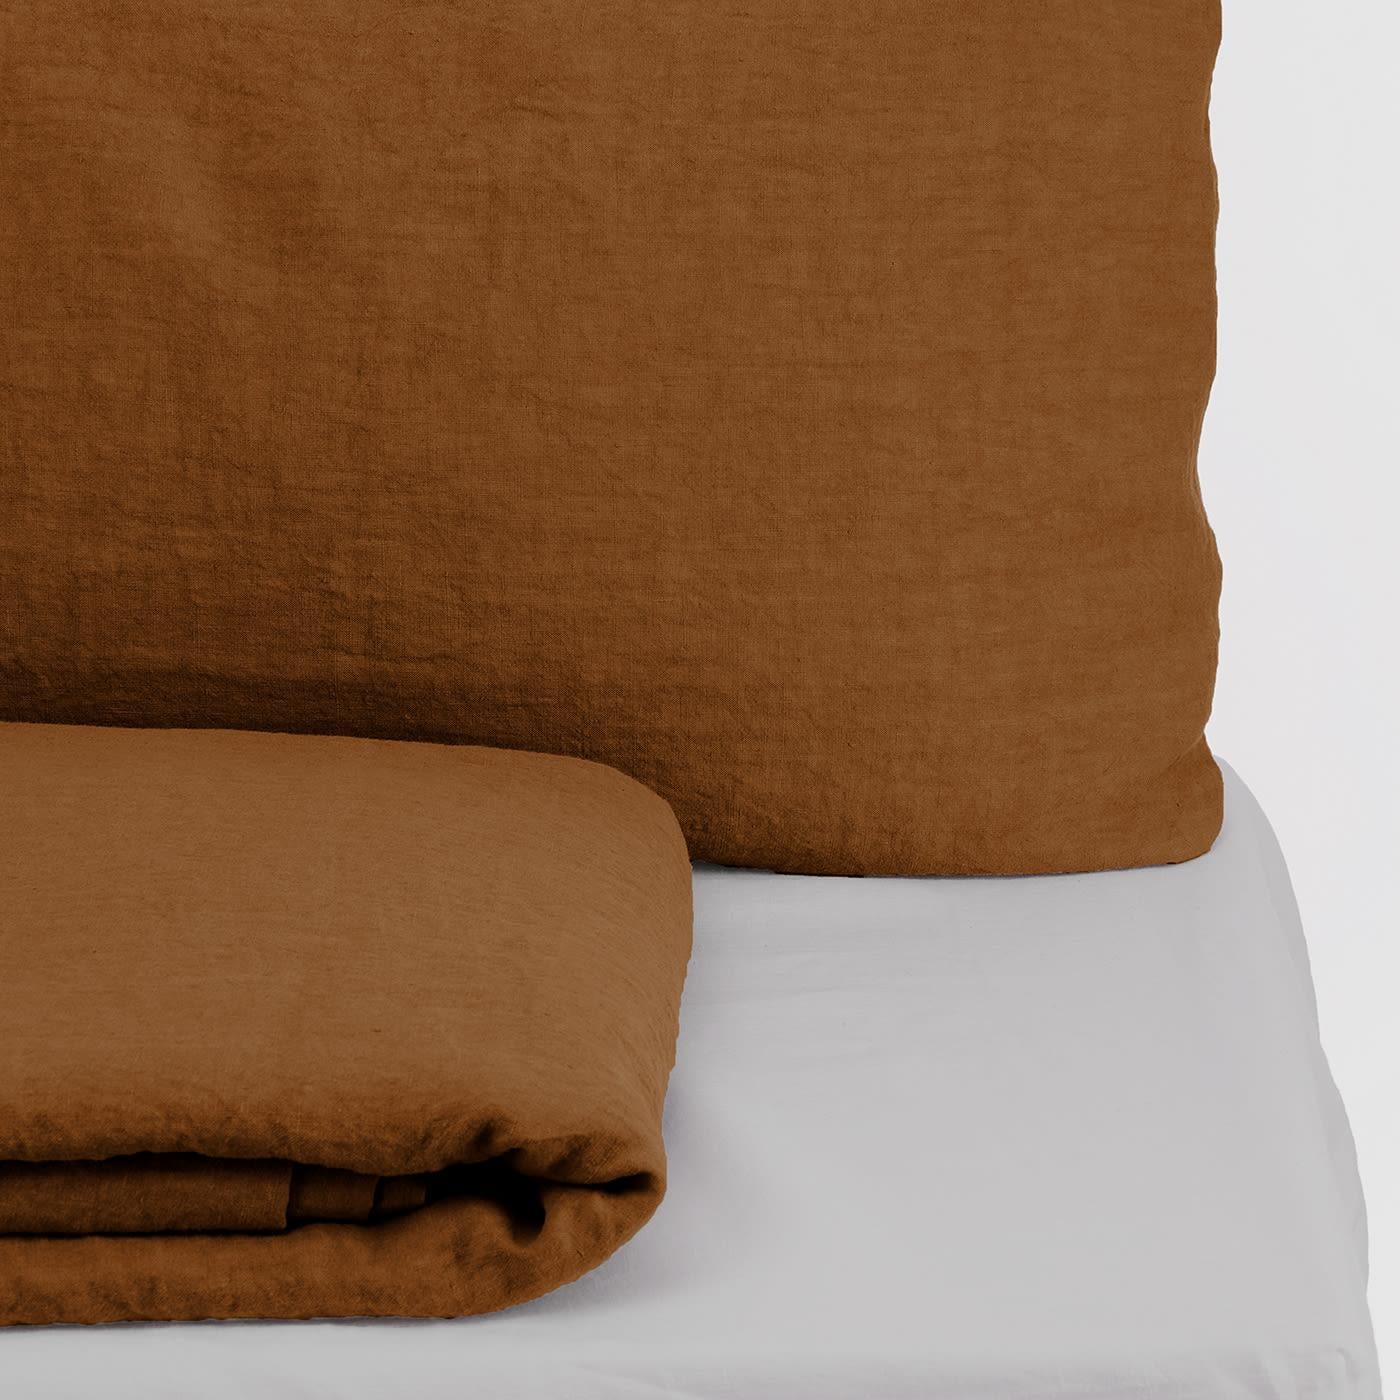 An elegant and colourful set entirely handmade of the finest linen, this set comprises a duvet cover with matching pillowcases dyed in a sophisticated sage brown, and a white fitted sheet that will fit a 30 cm-deep mattress. The delicate hue of the